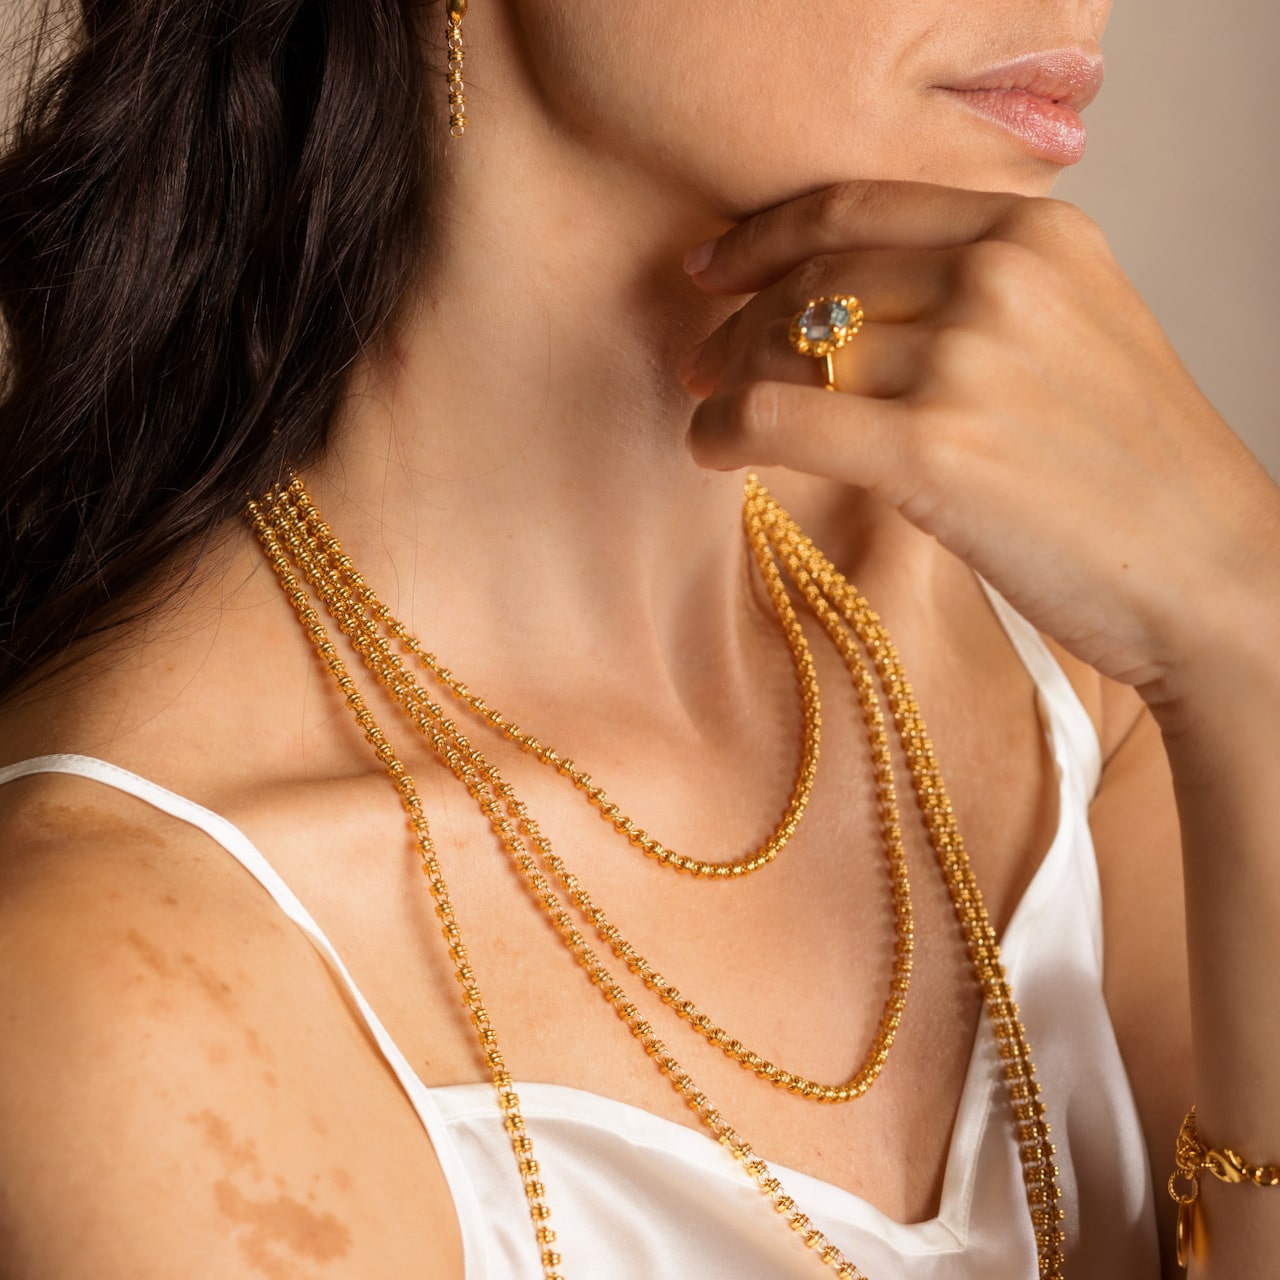 A person modeling four gold chains in varying lengths from a short, 16-inch gold chain to a 36-inch gold chain with matching gold earrings and a gold ring in the same iconic chain design around a semi-precious gemstone. All hand-crafted Italian jewelry is made by DelBrenna Italian Jewelers in Tuscany. 